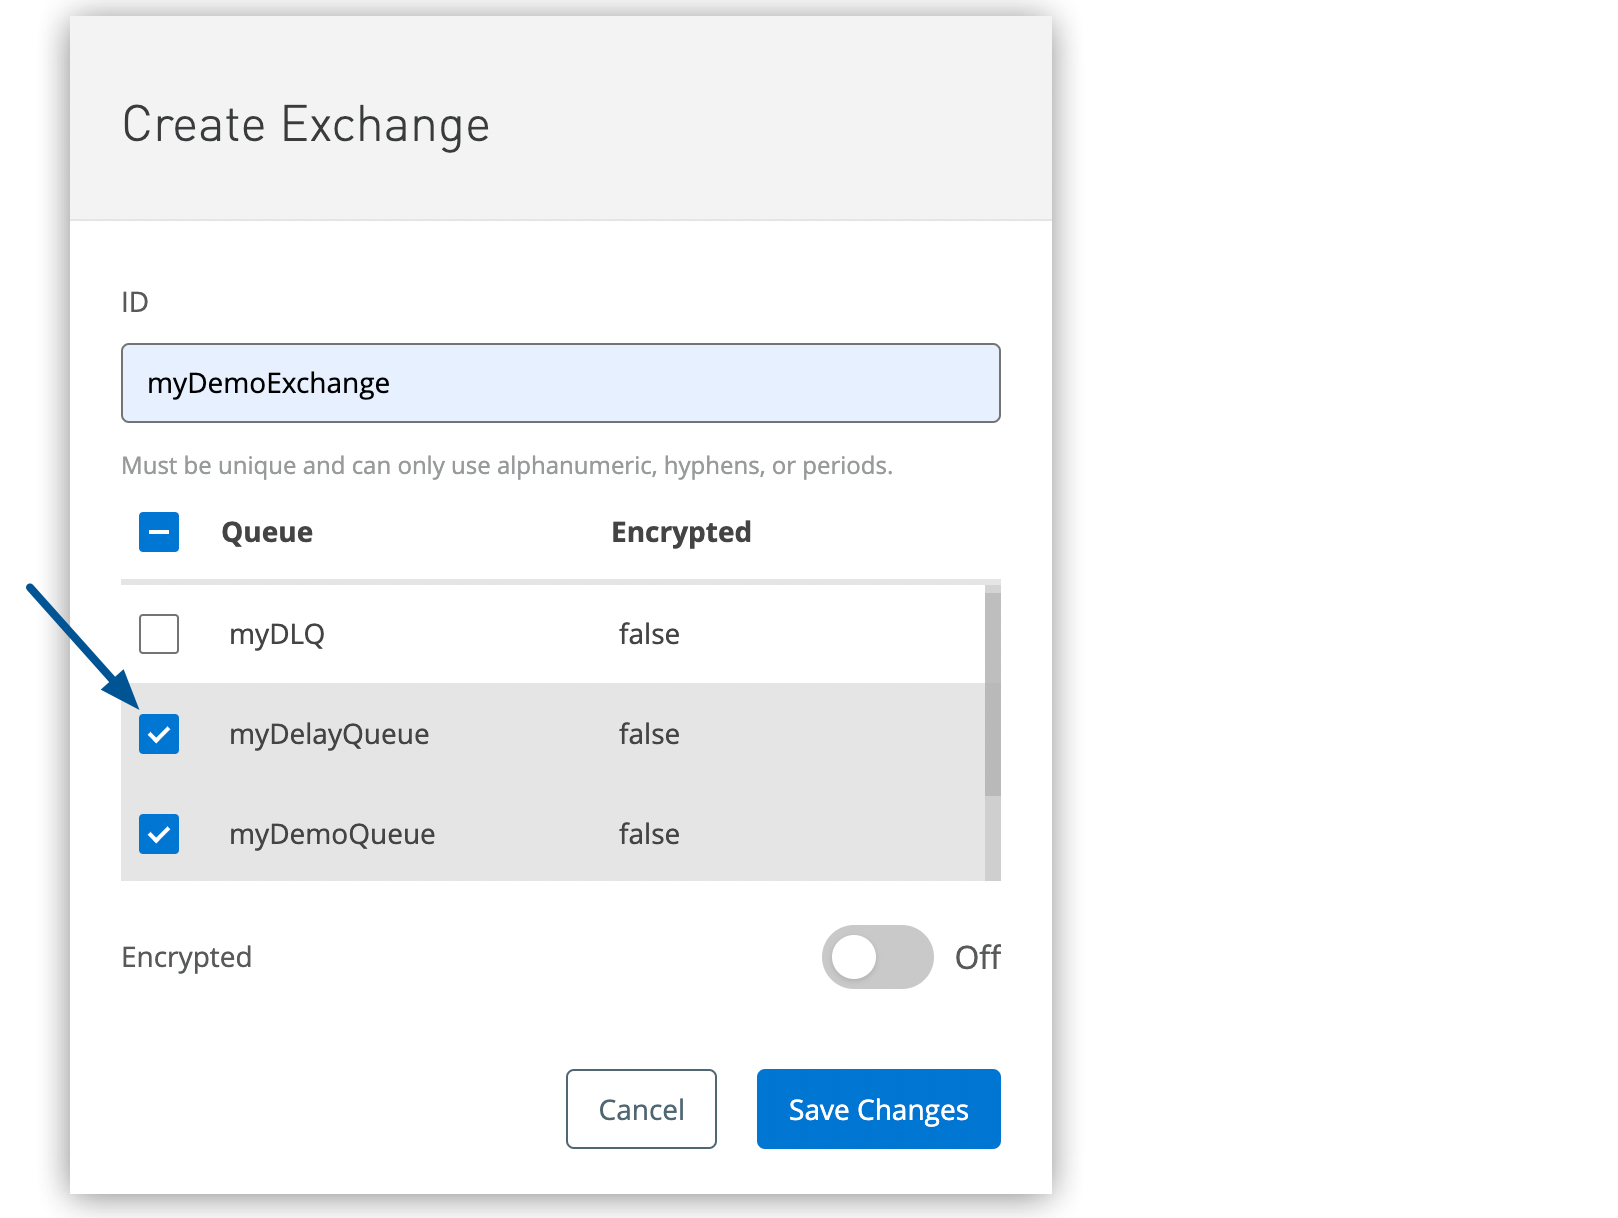 Checkboxes to bind queues to an exchange